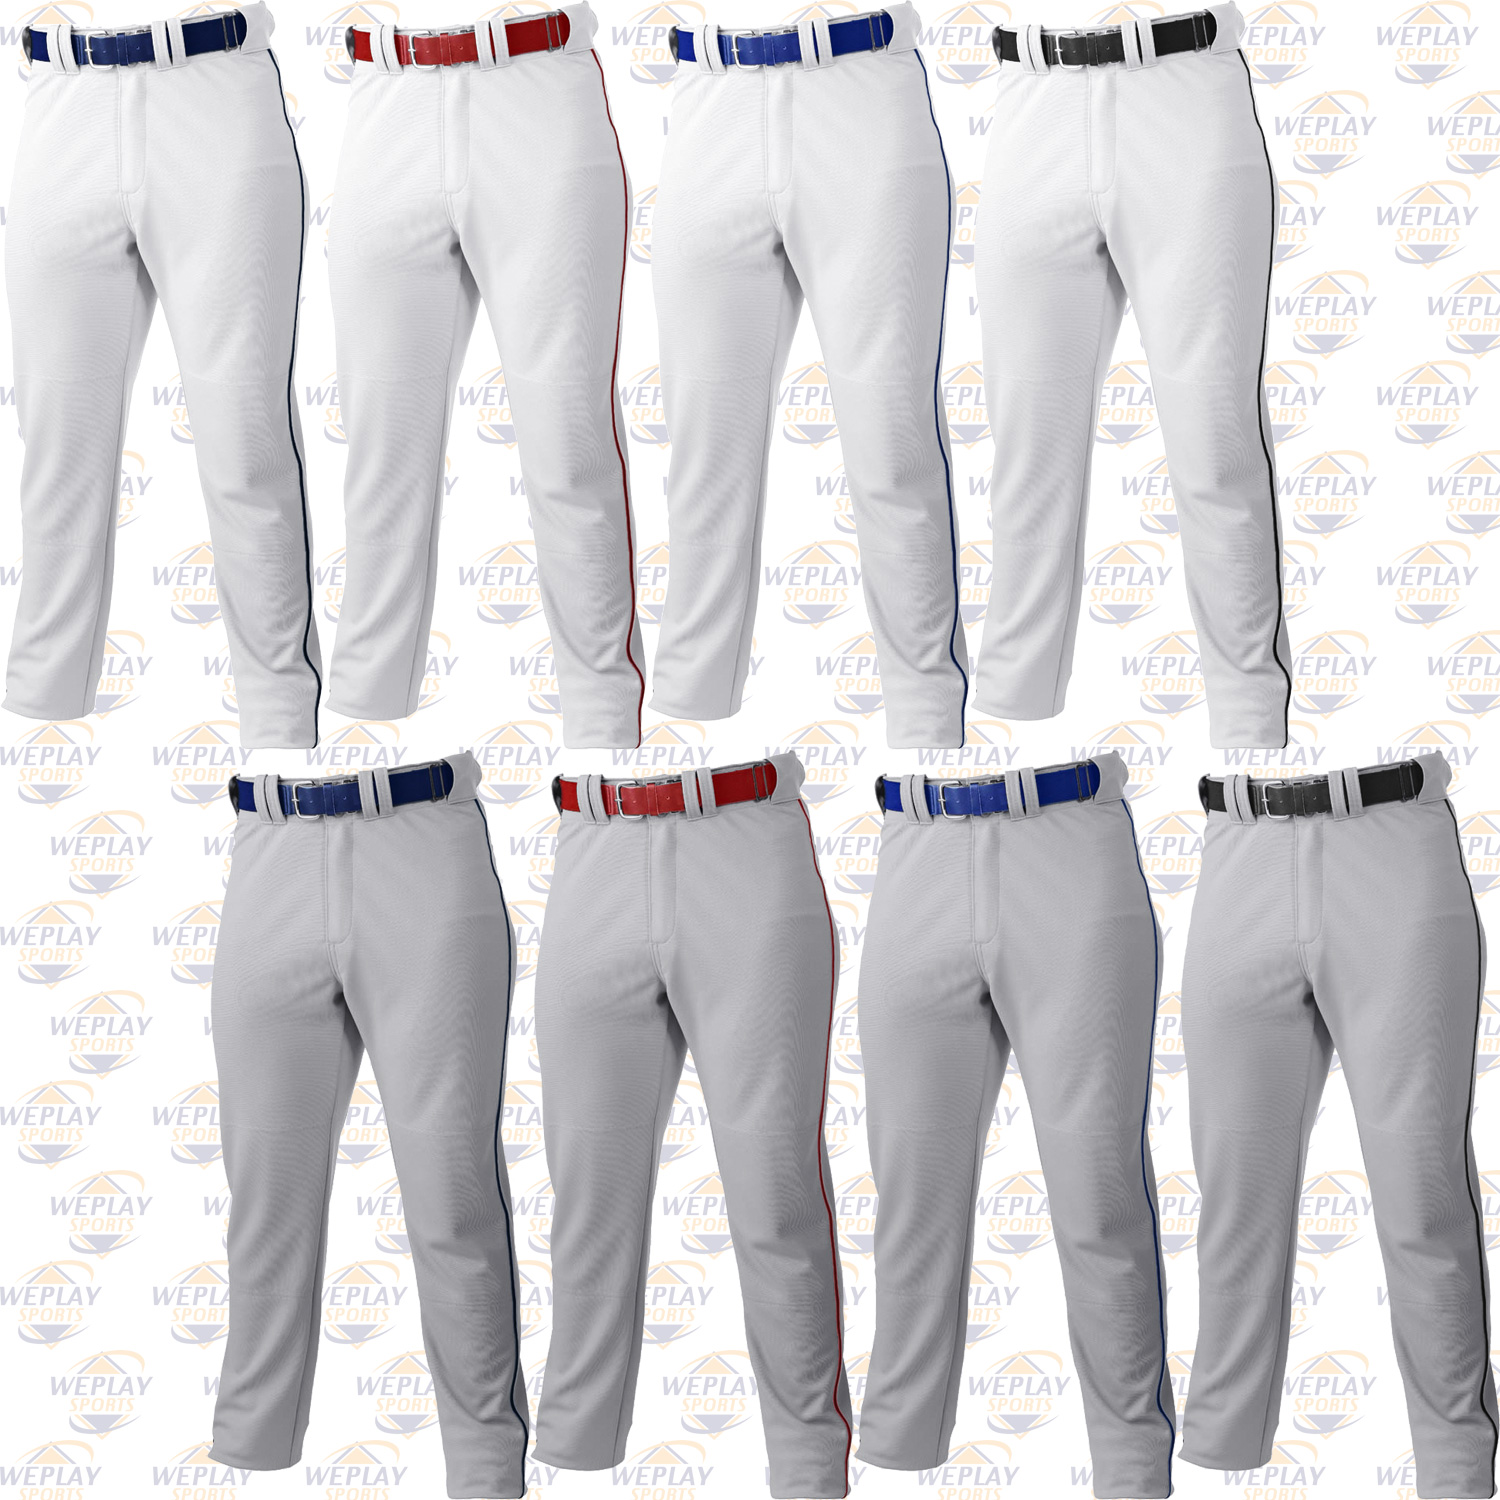 NEW RUSSELL WHITE YOUTH MEDIUM OPEN BOTTOM BASEBALL PANT WITH BELTS LOOPS 